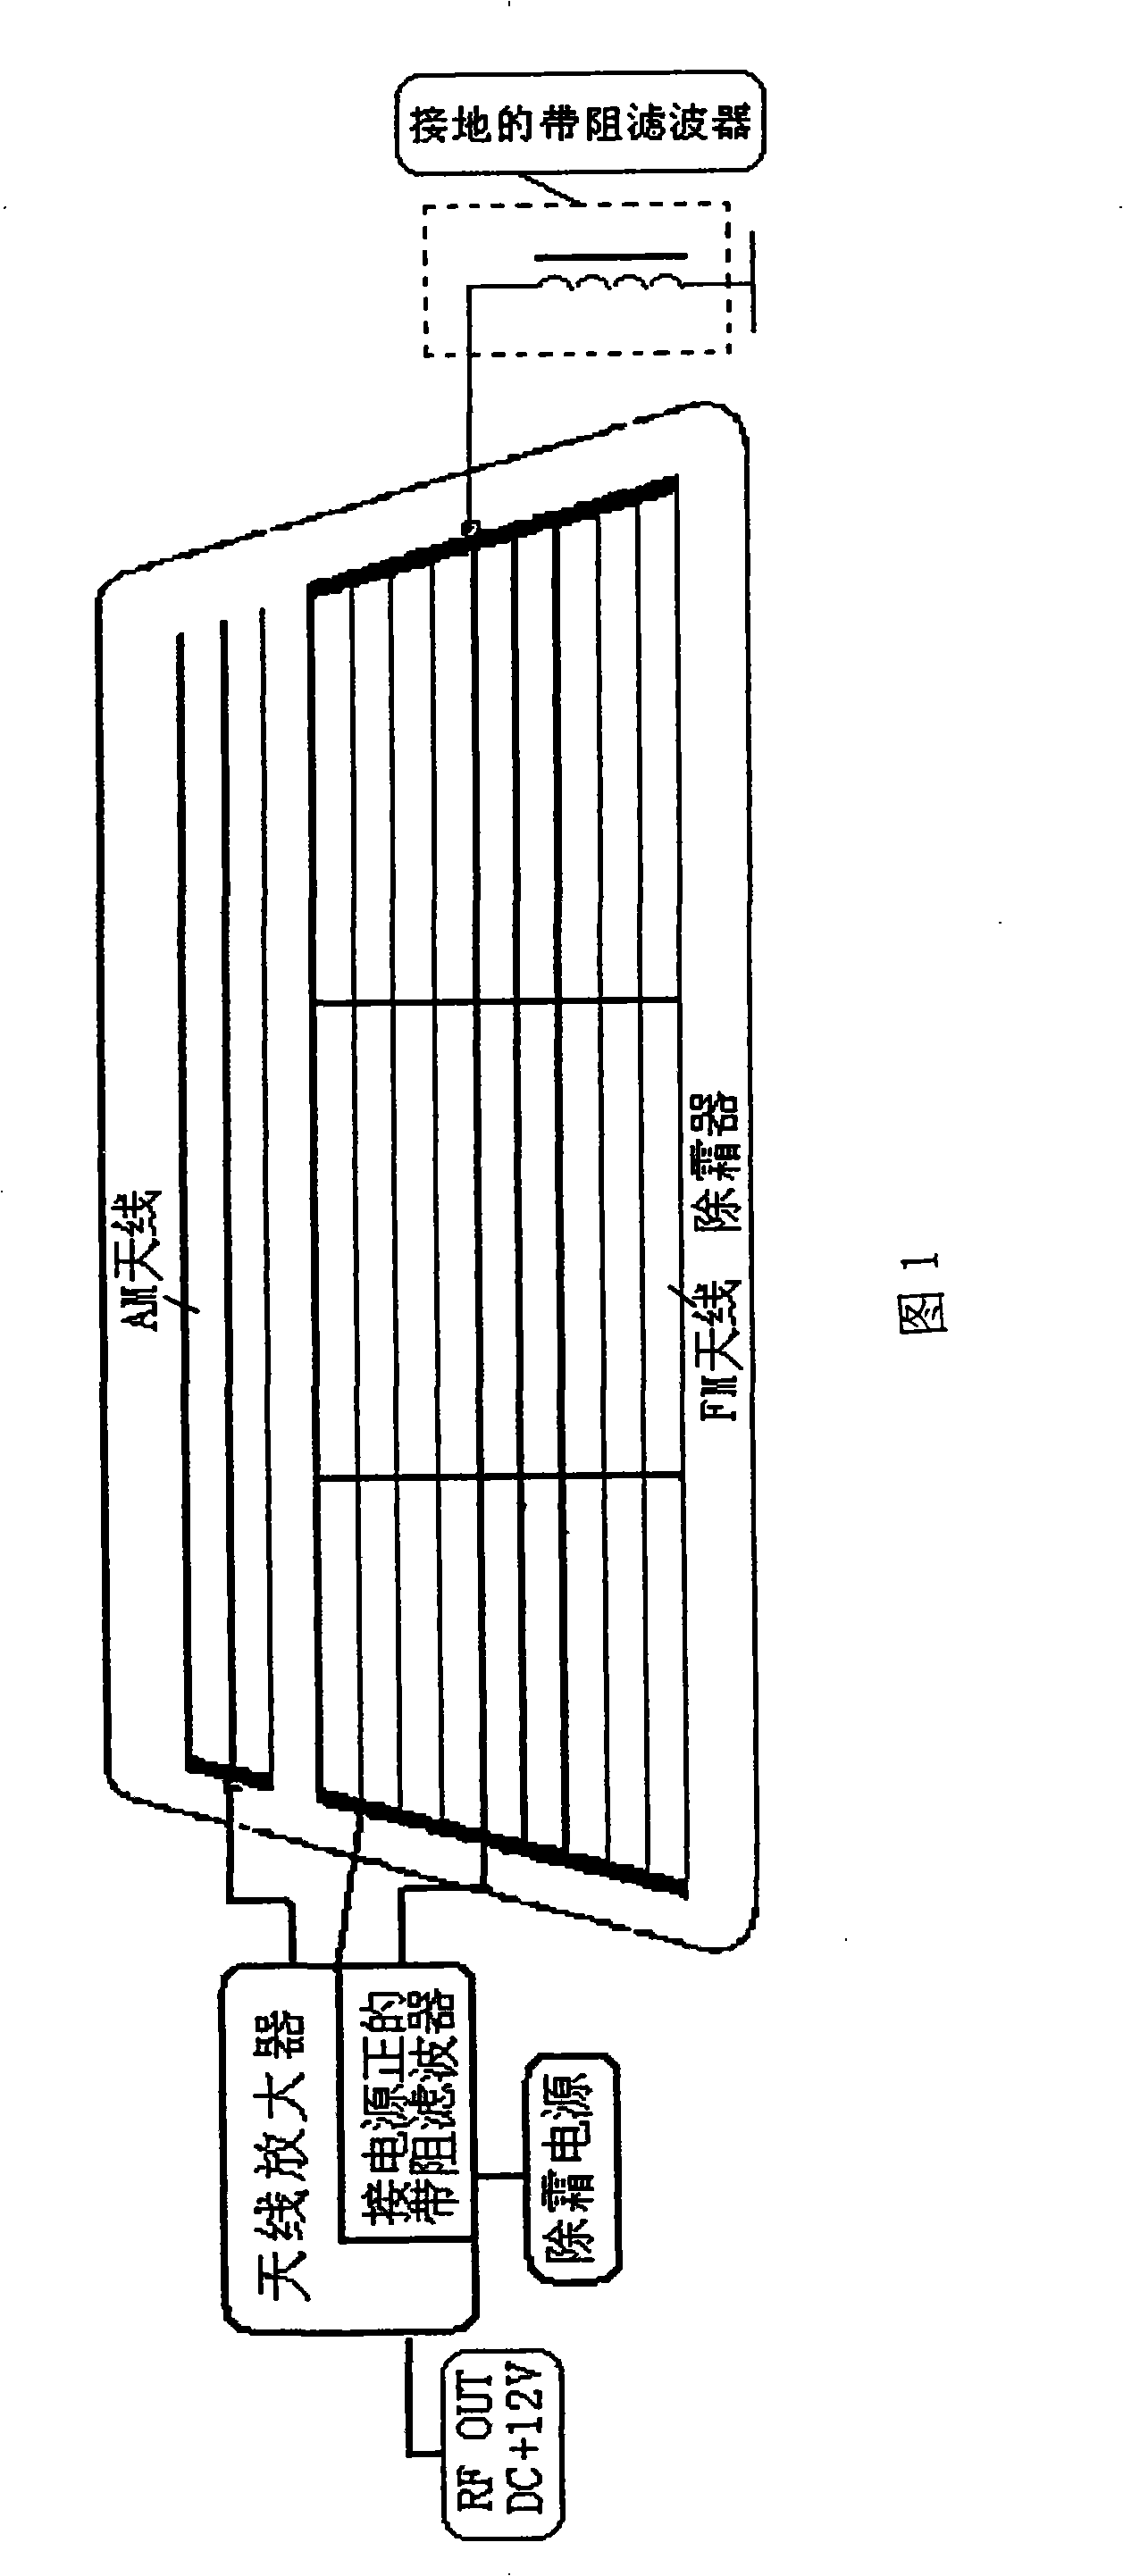 Printing antenna system of vehicle rear window glass